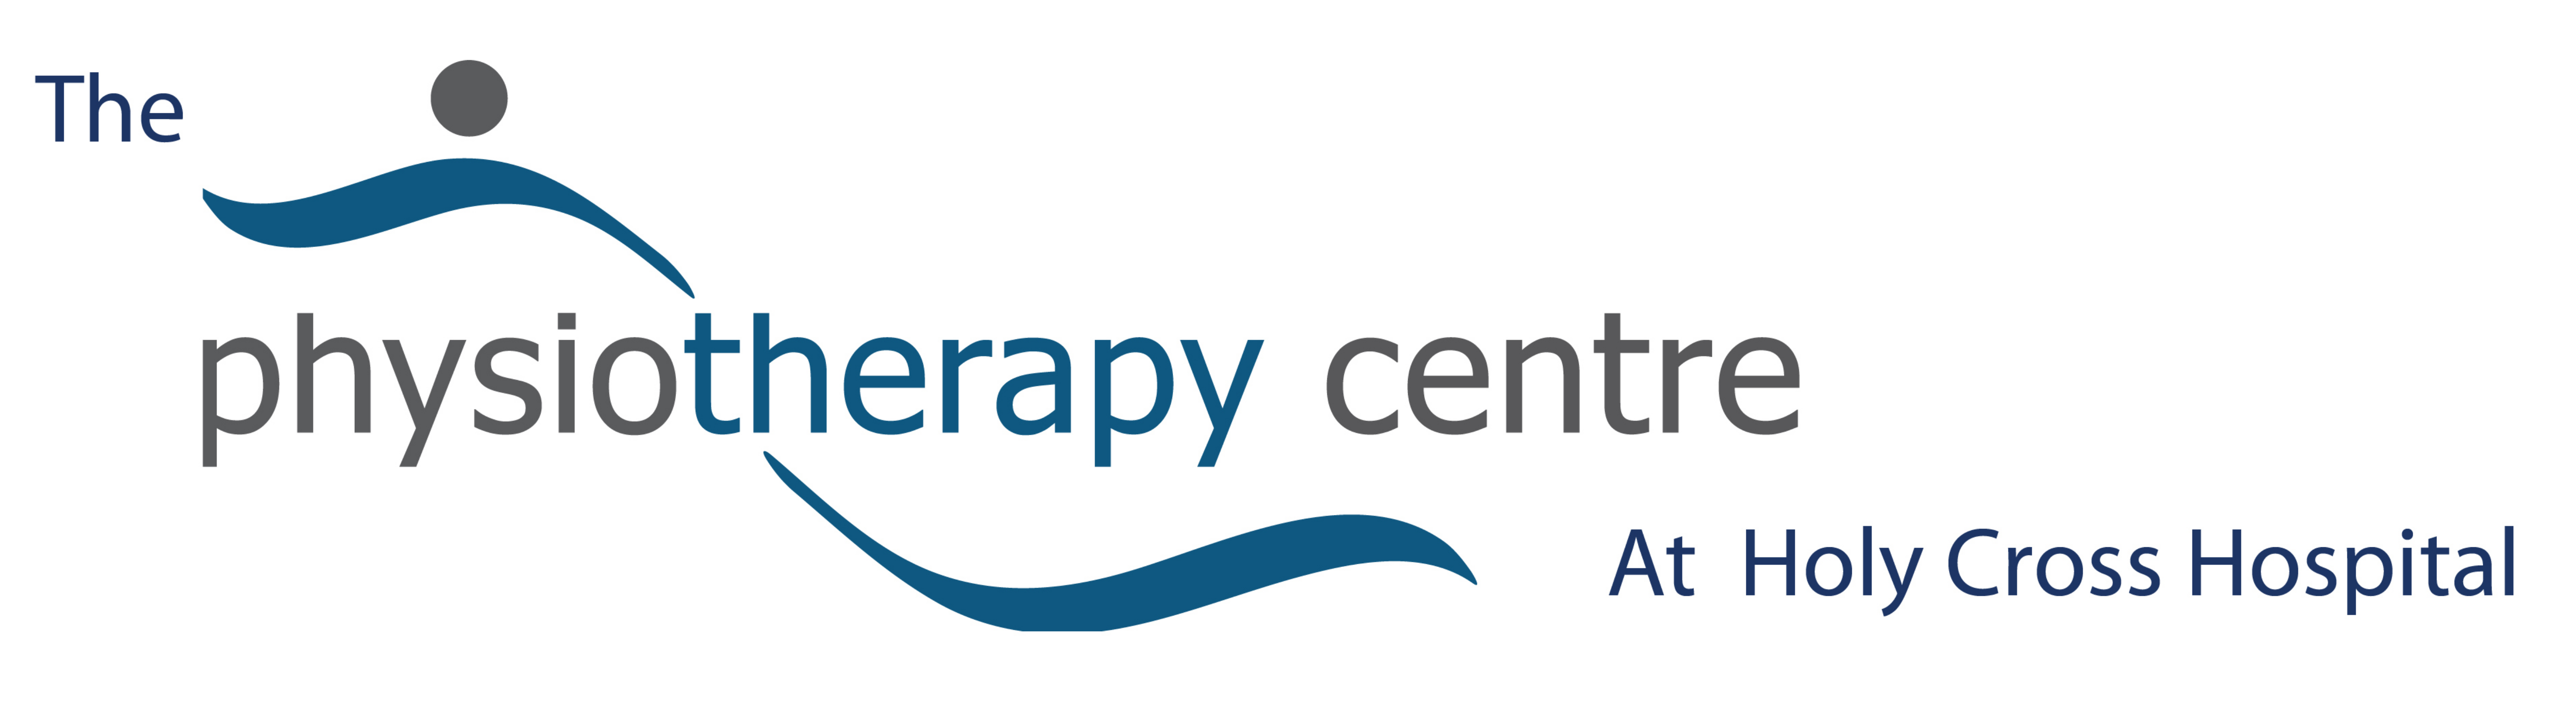 Physiotherapy Centre logo